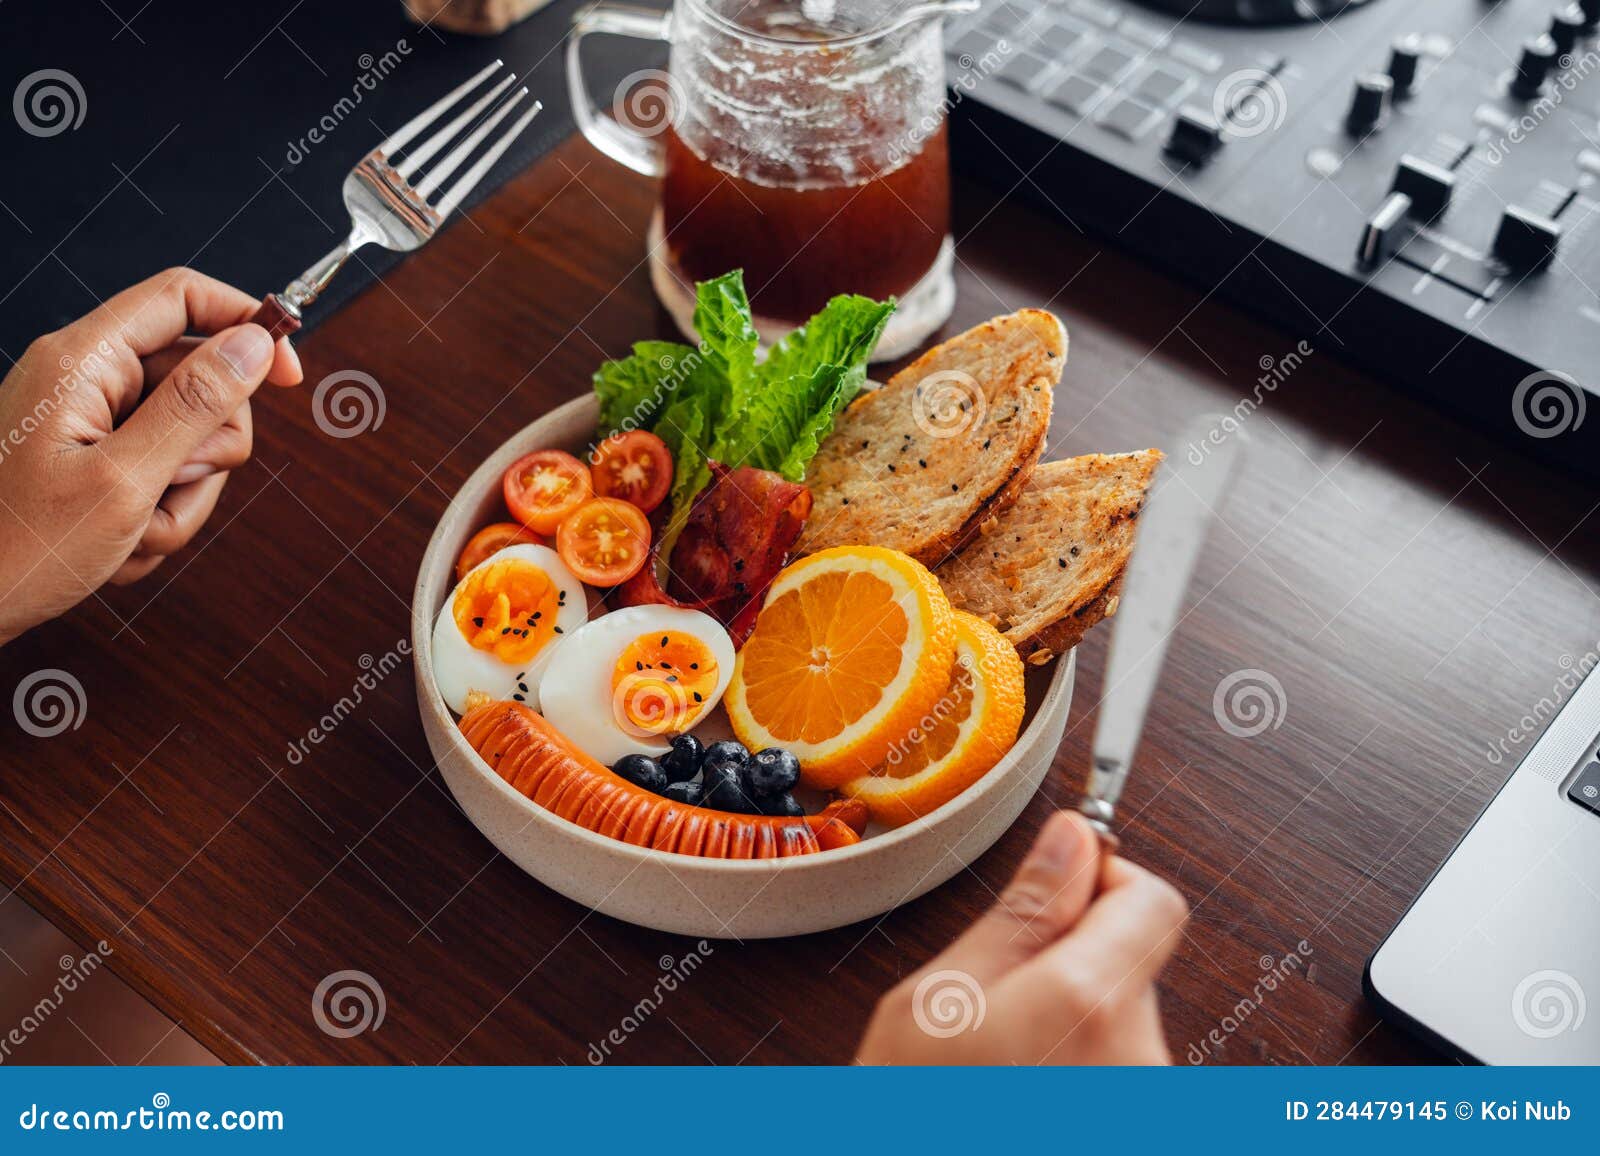 Breakfast Bread, Bacon, Boiled Eggs, Sausage and Coffee Stock Image ...